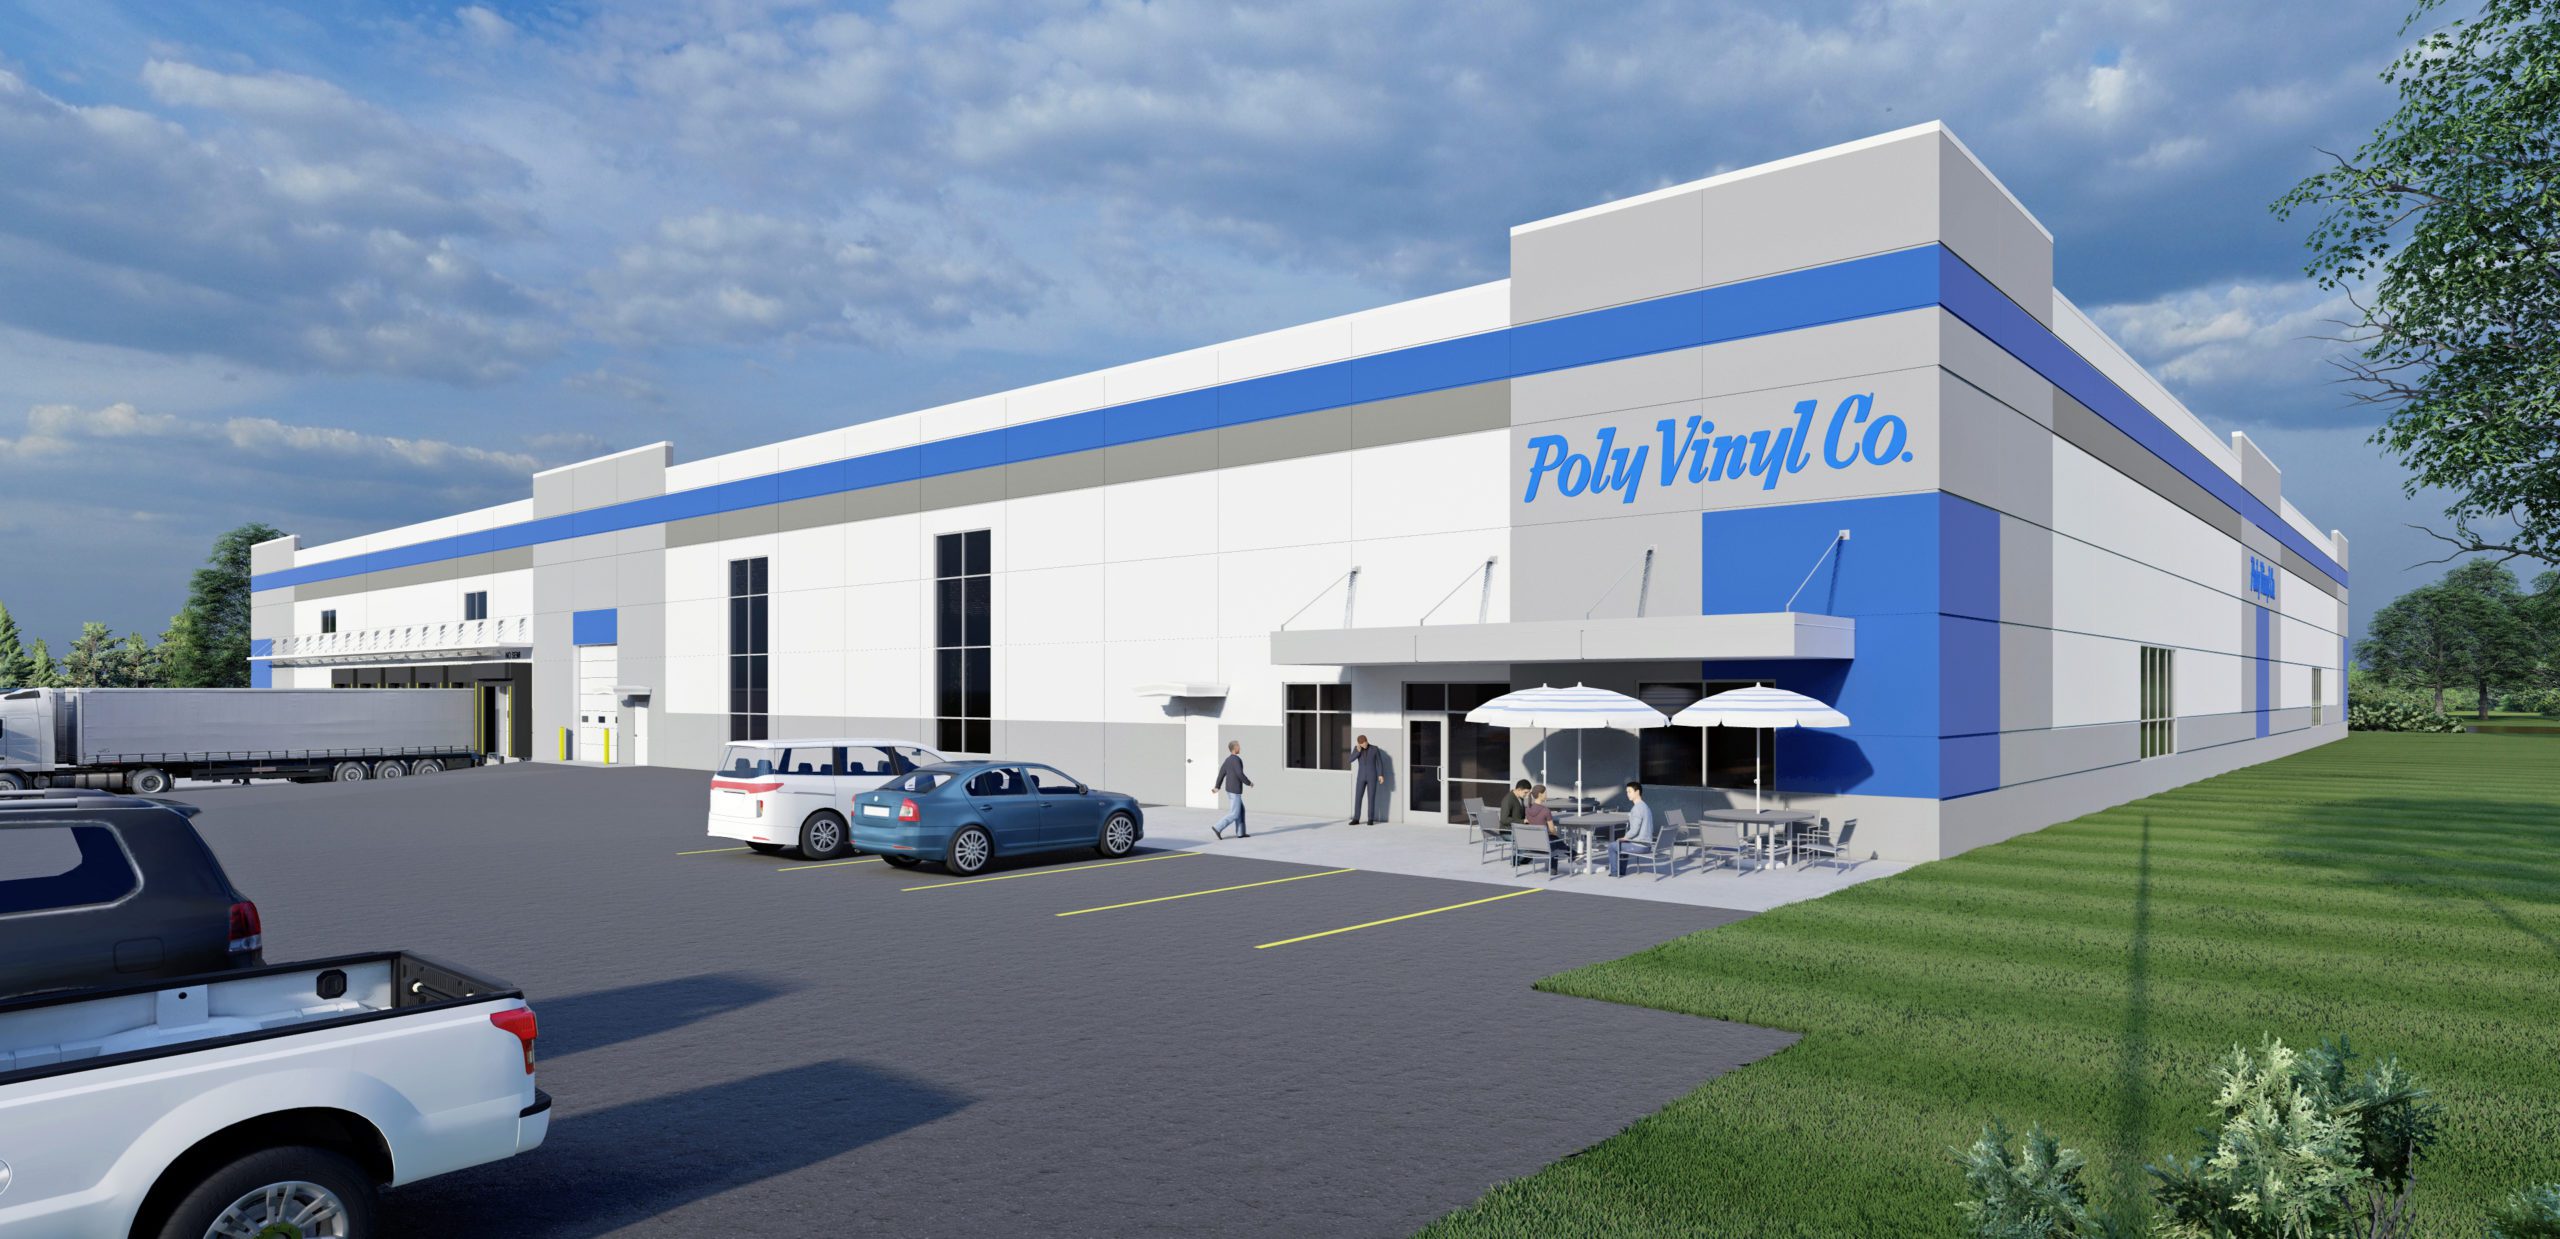 Exterior rendering of Ply Vinyl Co. industrial building with loading dock